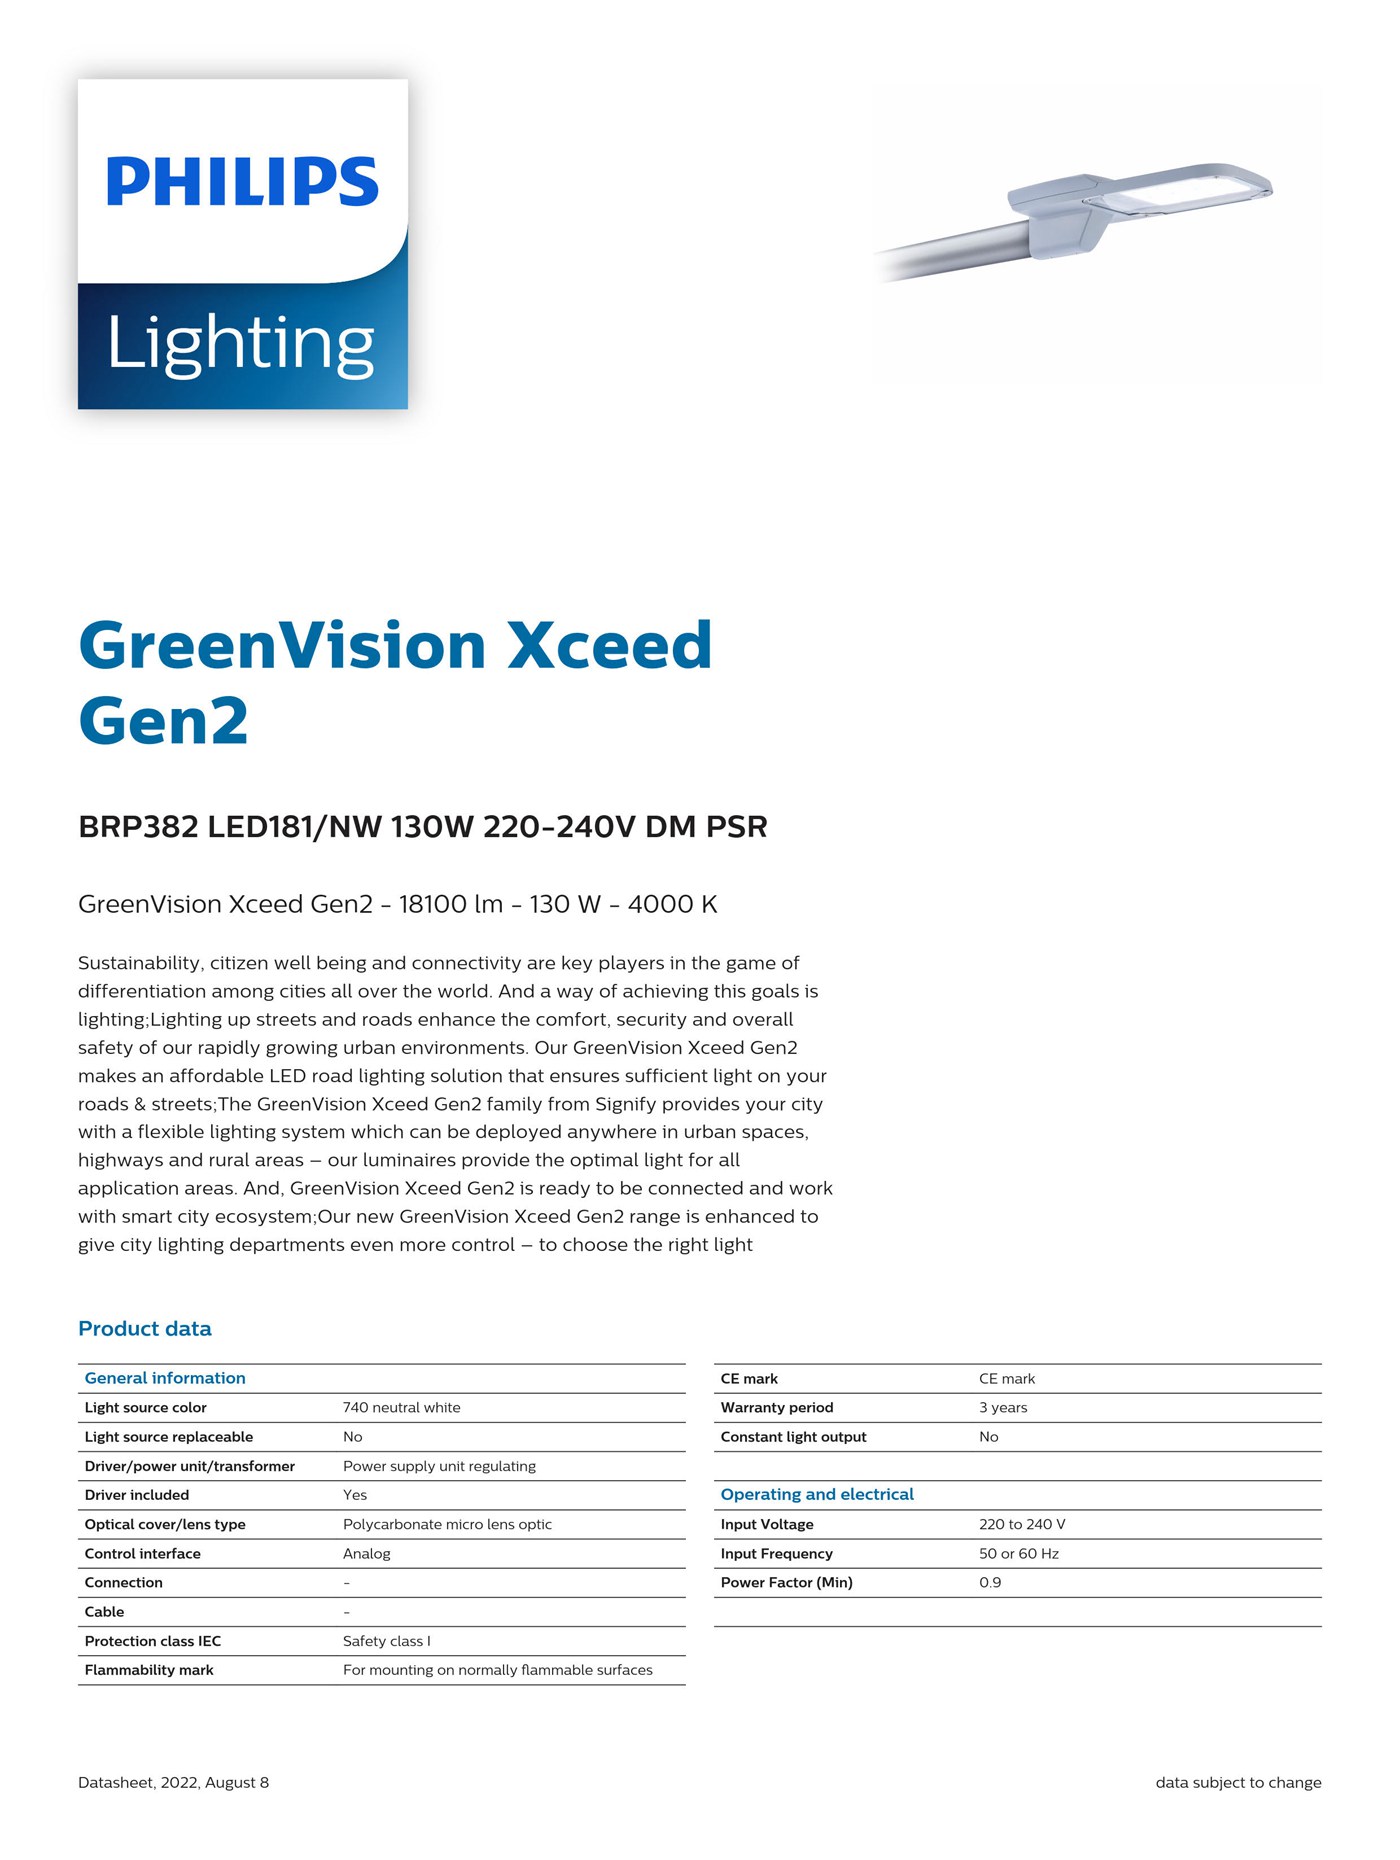 PHILIPS GreenVision Xceed Gen2 BRP382 LED181/NW 130W 220-240V DM PSR 911401875498